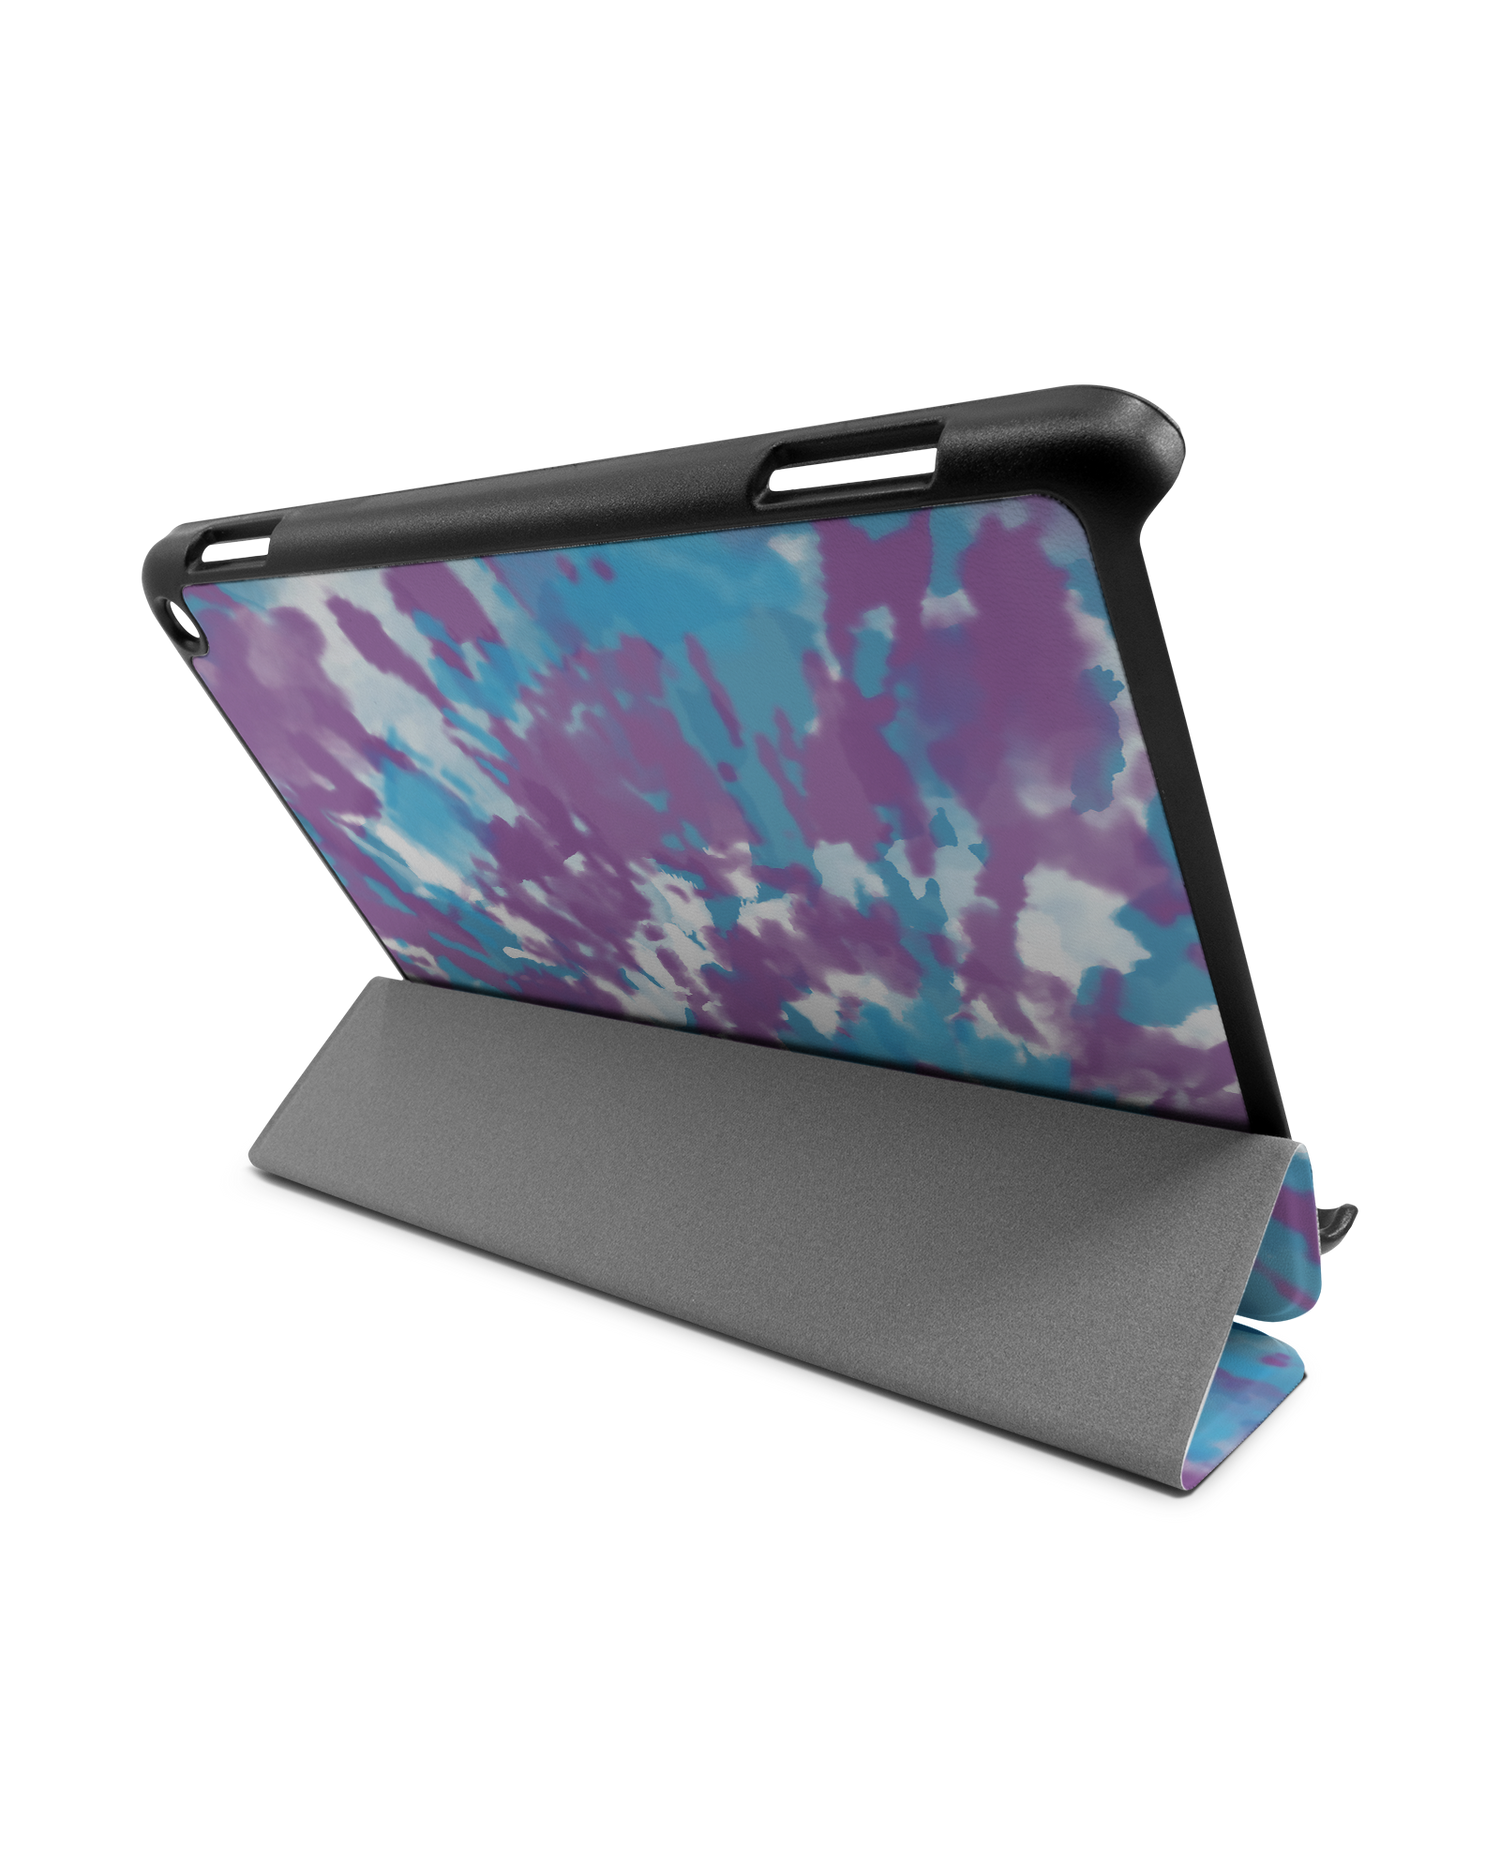 Classic Tie Dye Tablet Smart Case for Amazon Fire HD 8 (2022), Amazon Fire HD 8 Plus (2022), Amazon Fire HD 8 (2020), Amazon Fire HD 8 Plus (2020): Used as Stand